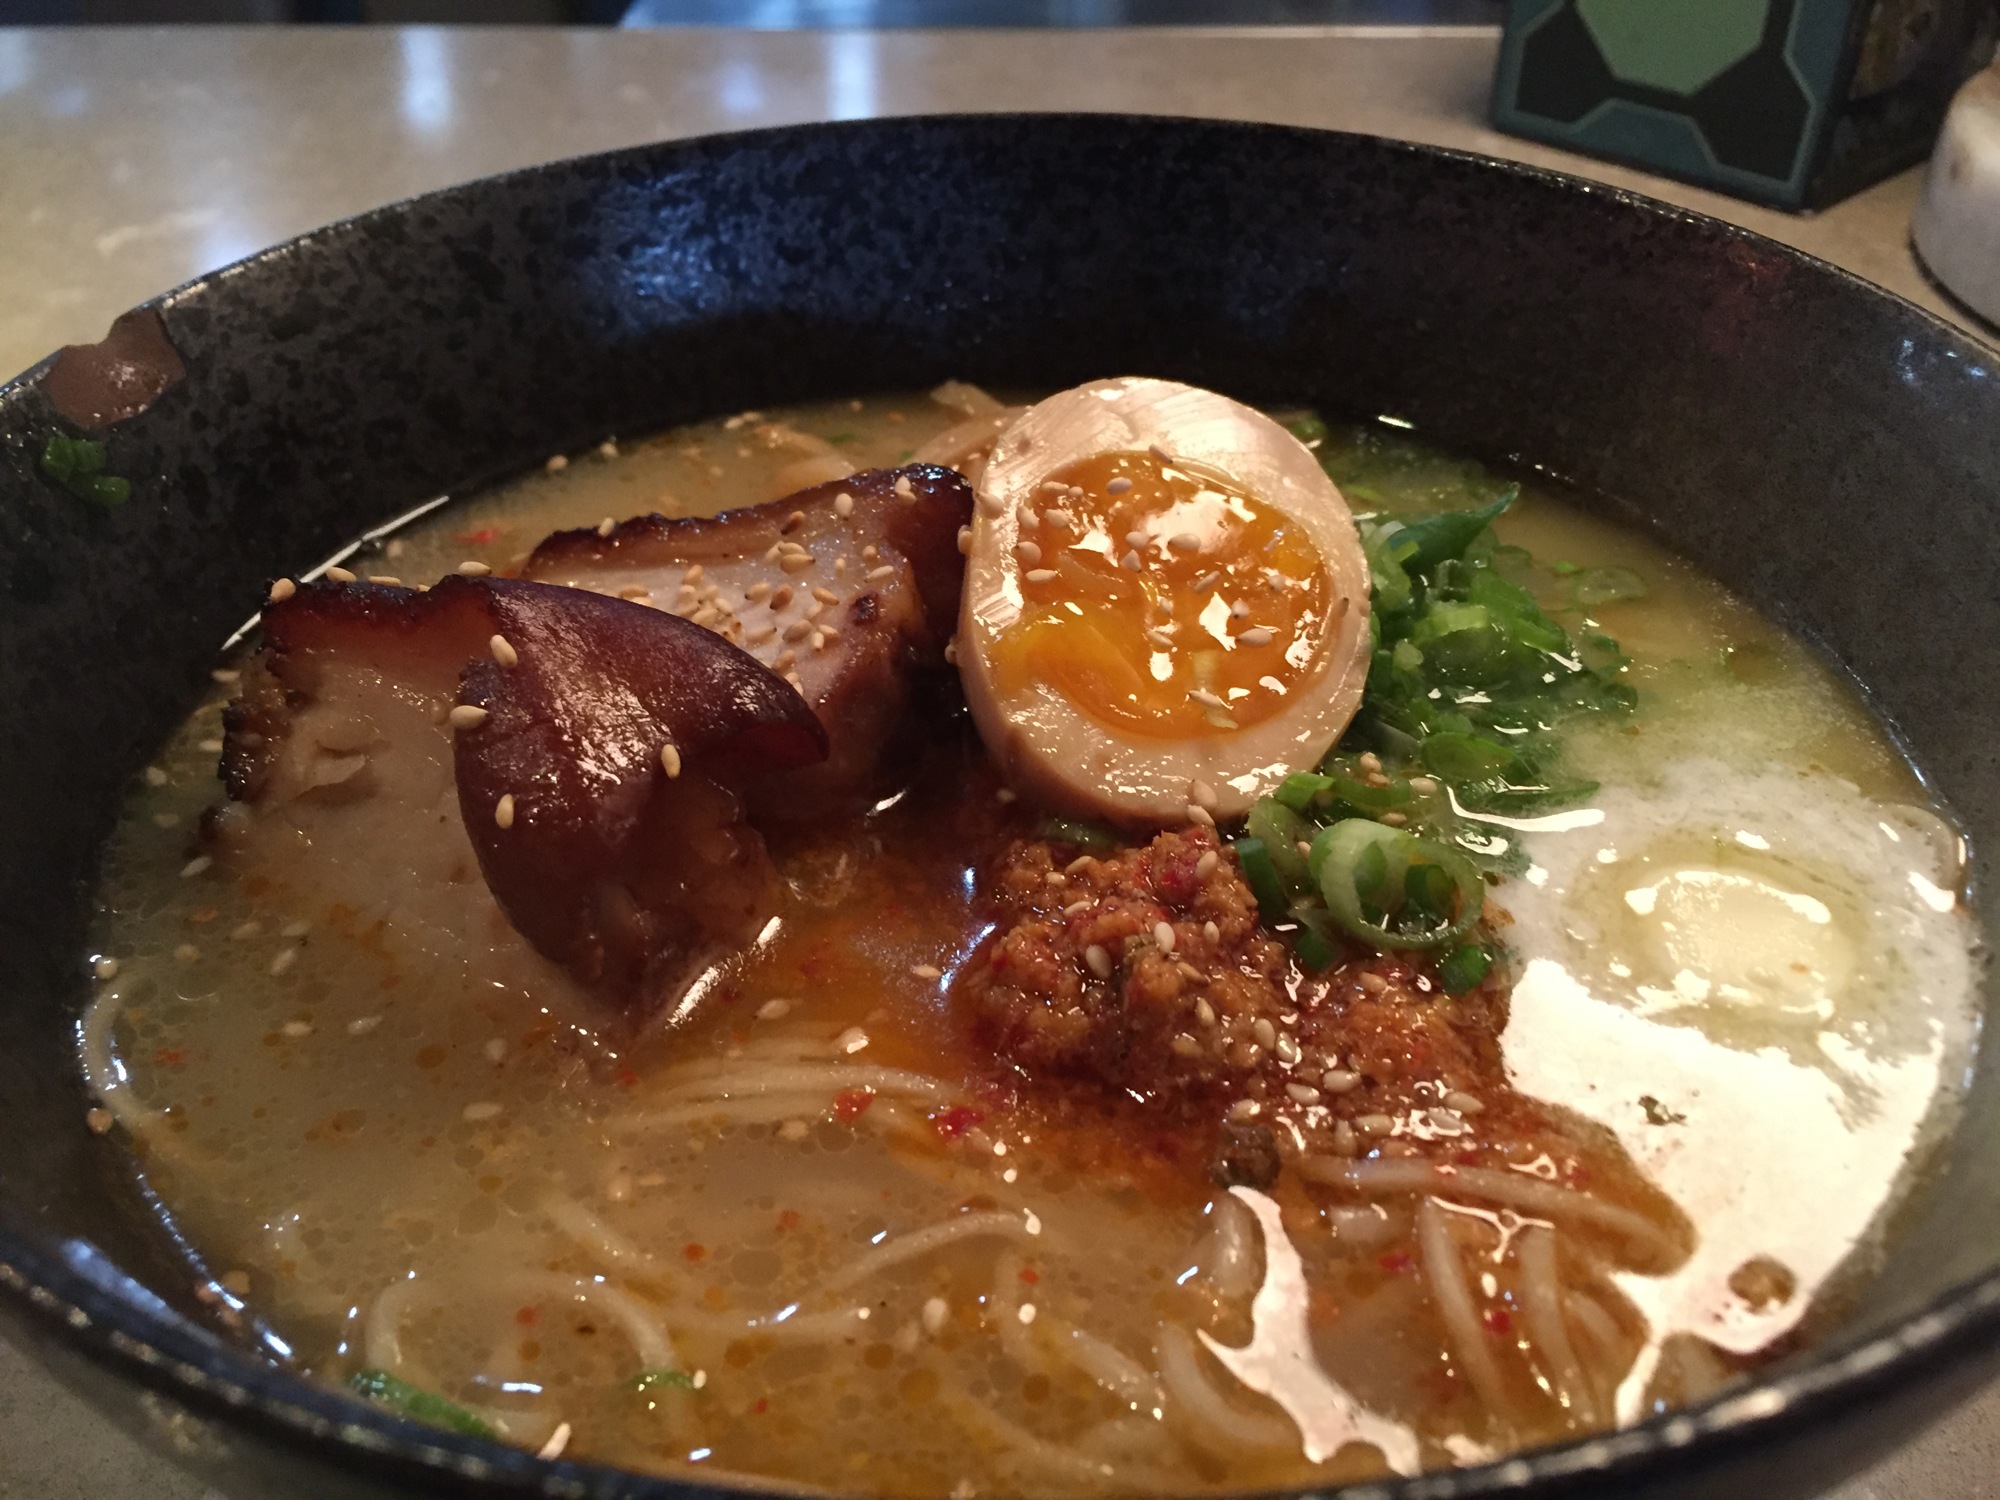 Domu serves up ramen made from scratch with noodles that are made fresh daily.